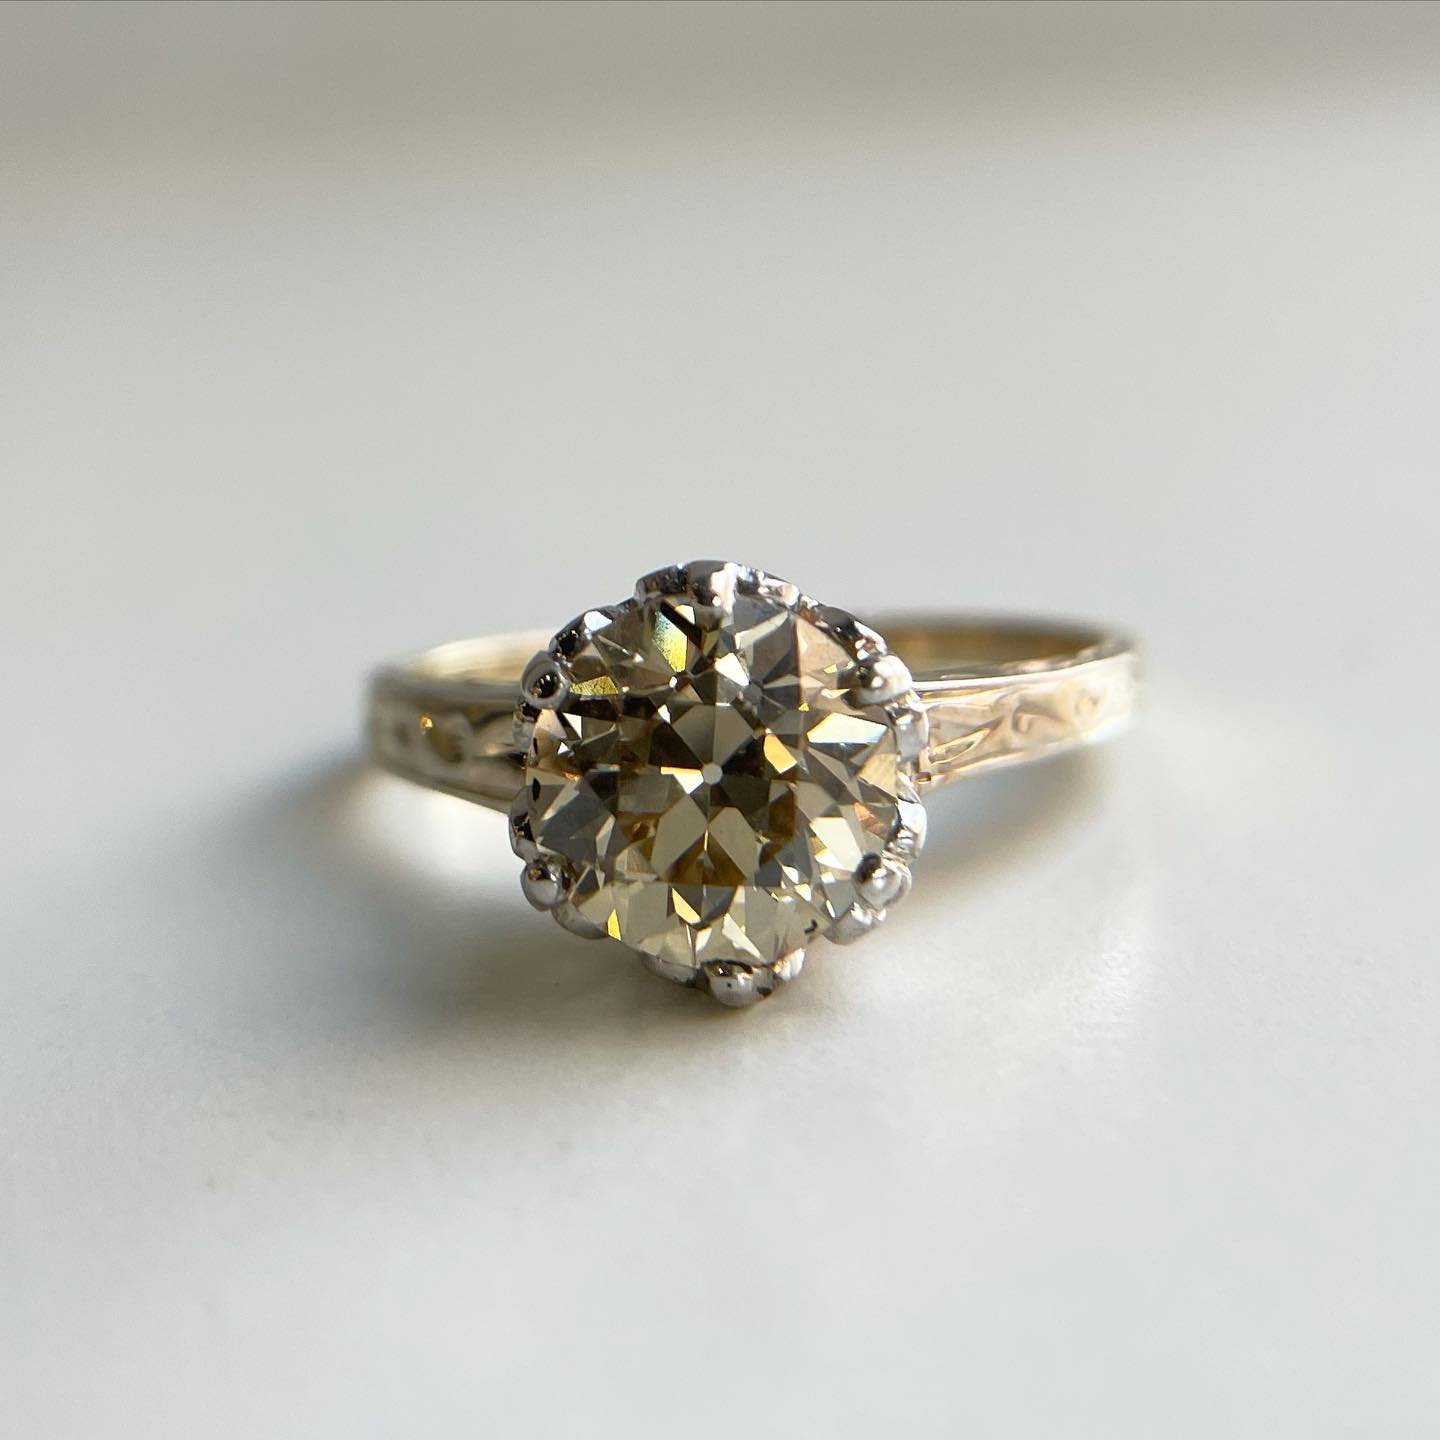 This antique Art Deco diamond solitaire engagement ring showcases a 1.63 carat old European brilliant diamond at its center. The ring is crafted from 14k yellow gold, and platinum, weighing 2.9 grams. The center diamond has a clarity grade of VS1 and